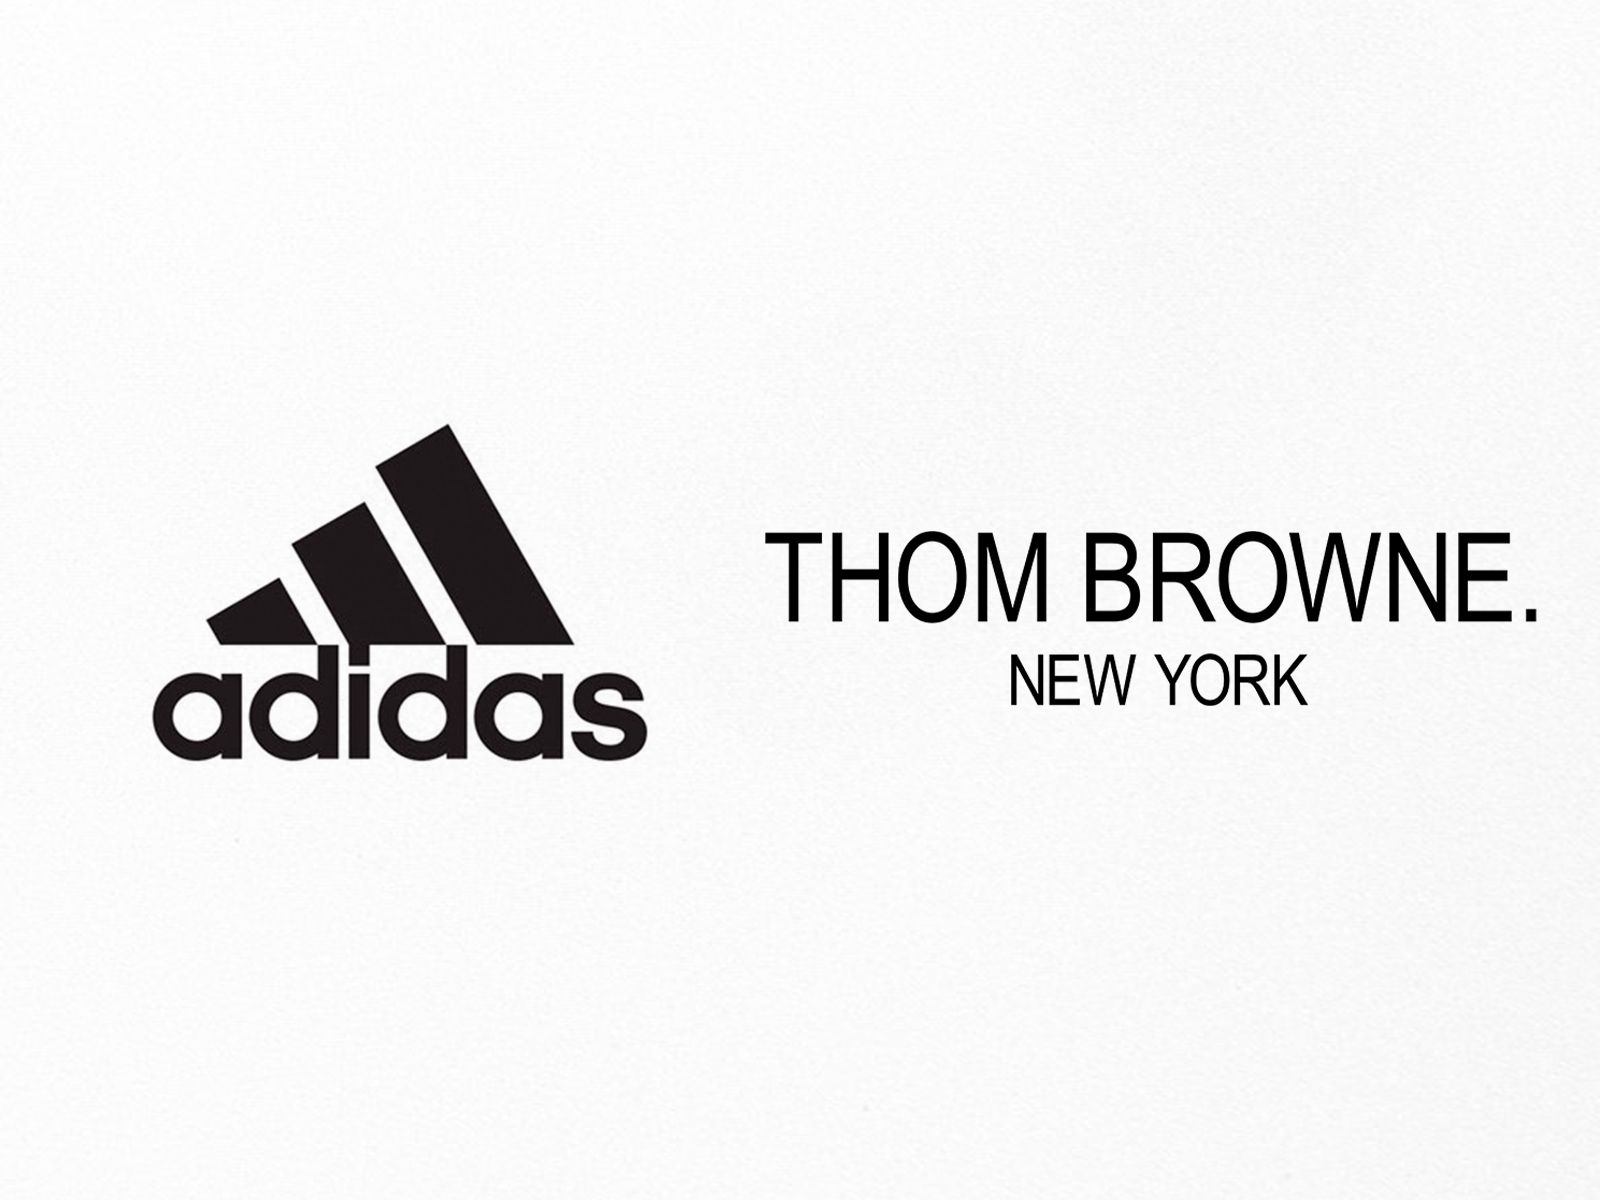 adidas and Thom Browne go to court over three stripes dispute